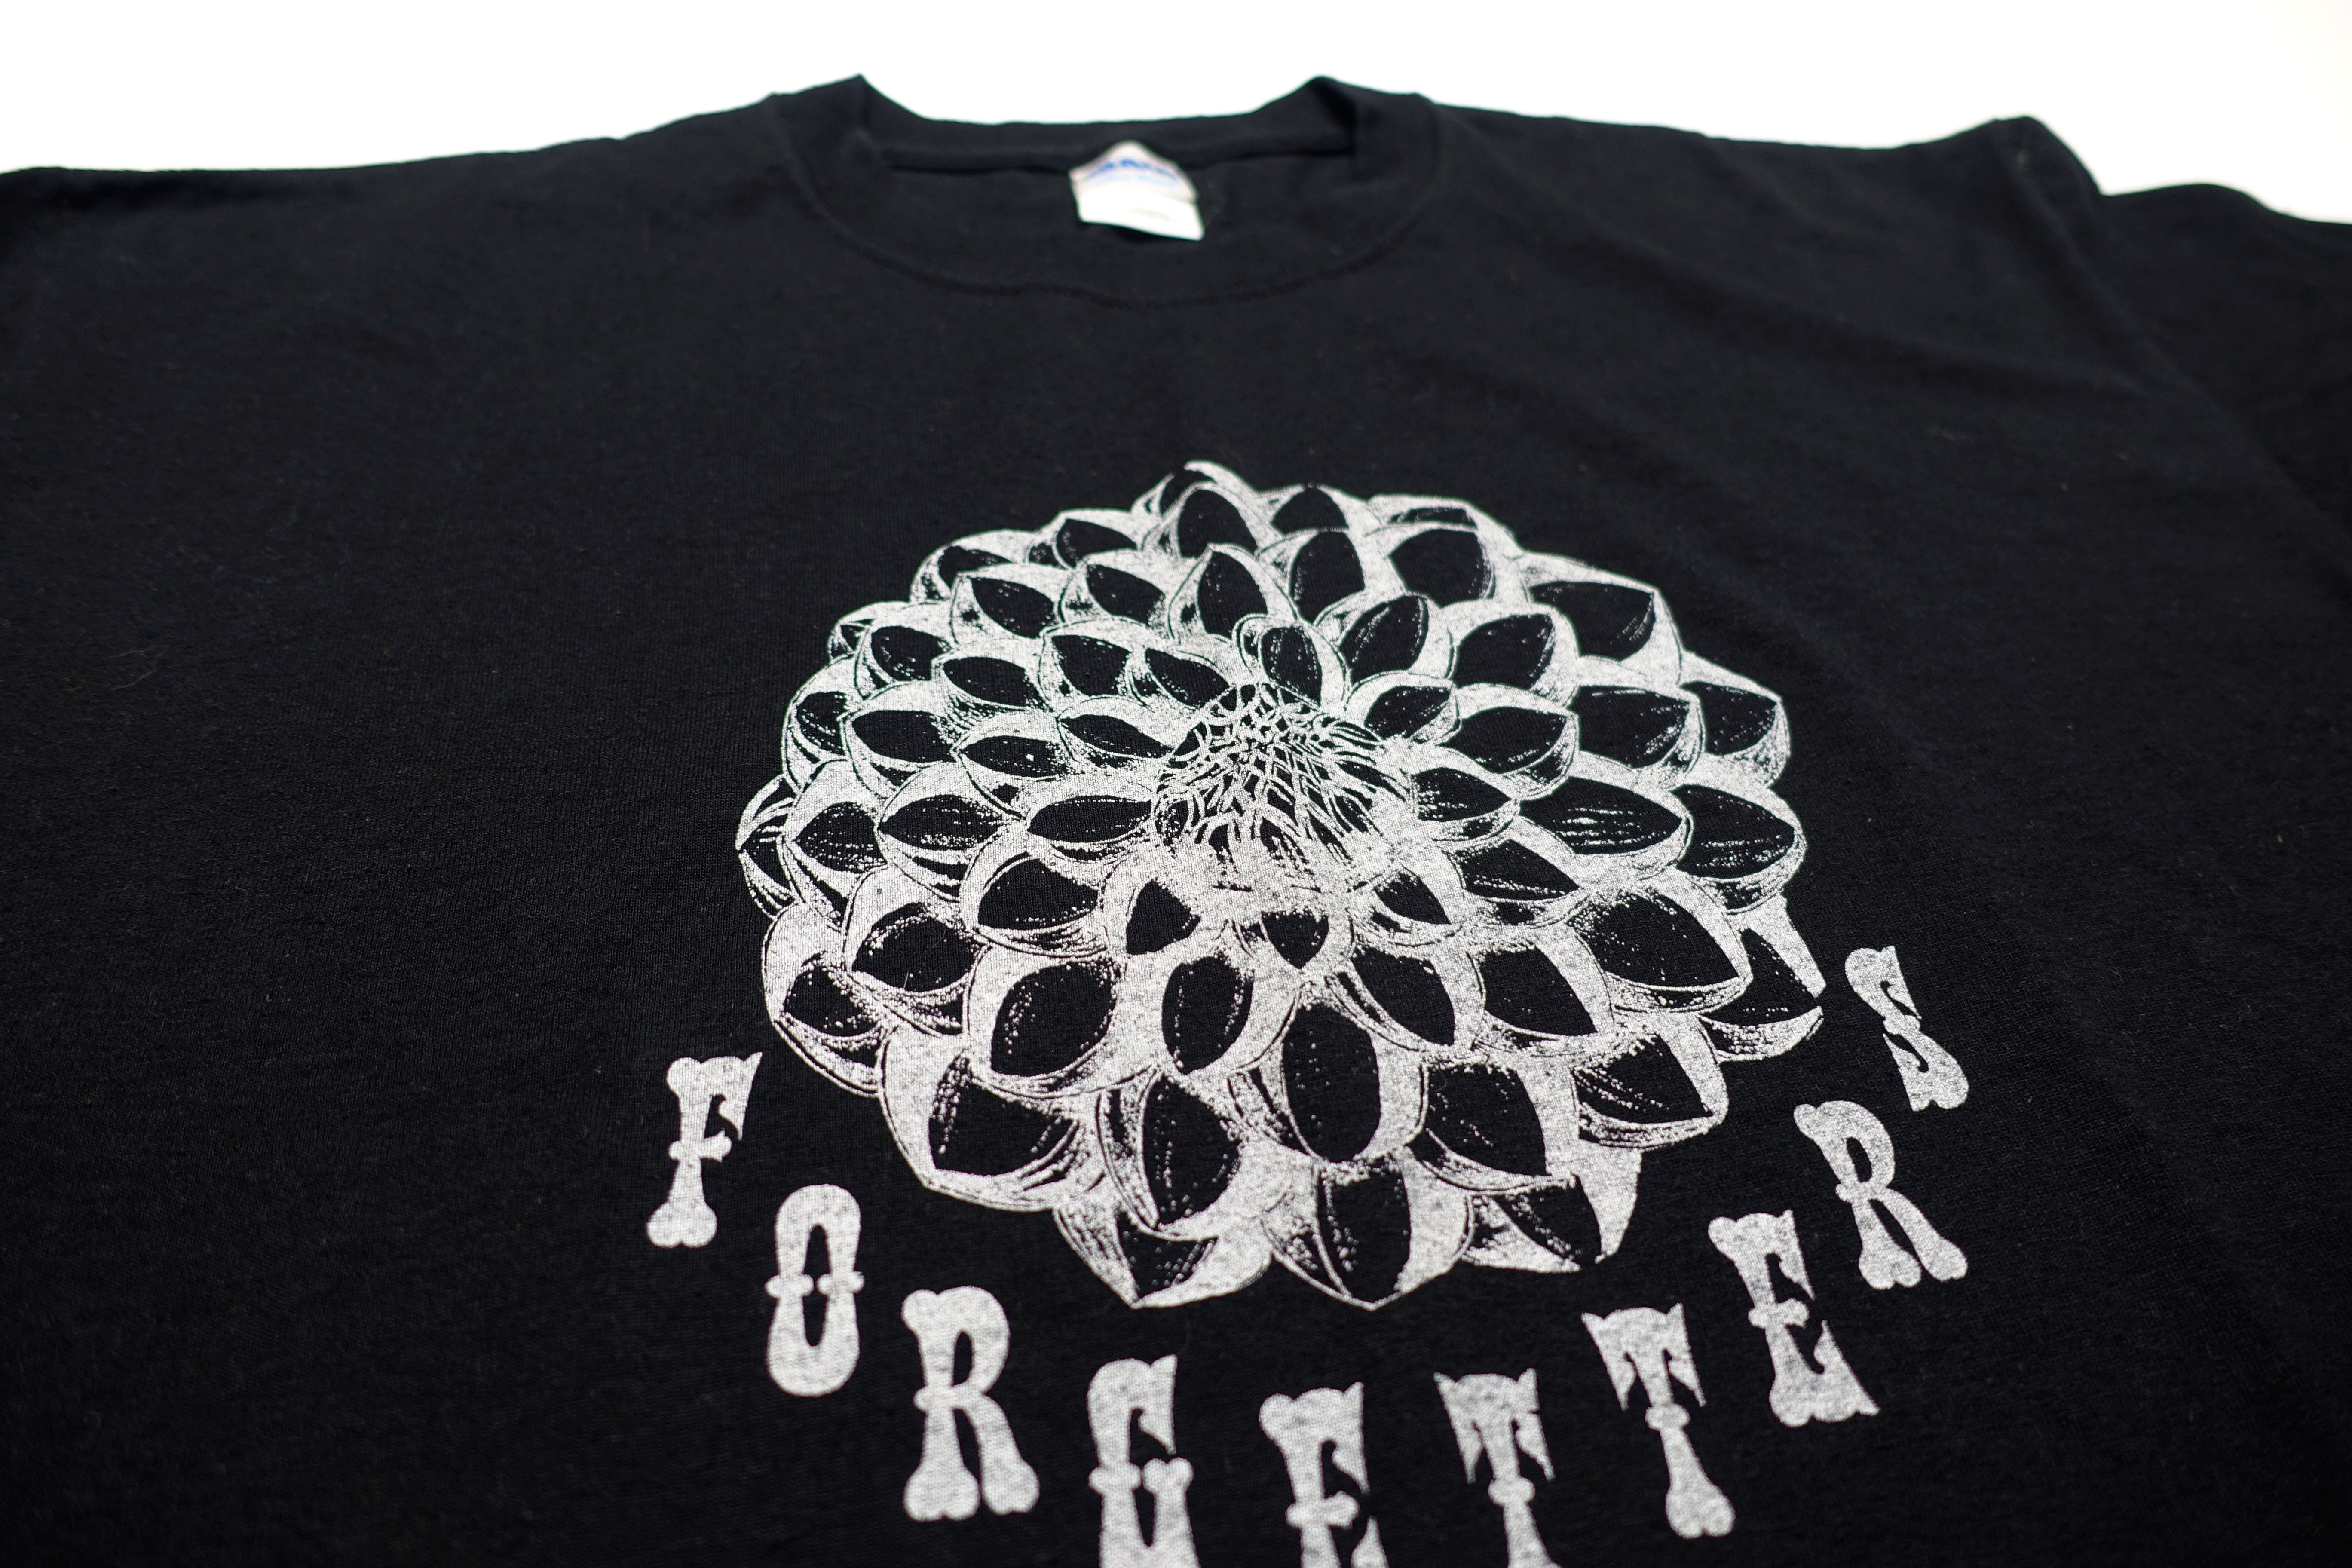 Forgetters - Flower 2011 Tour Shirt Size Large